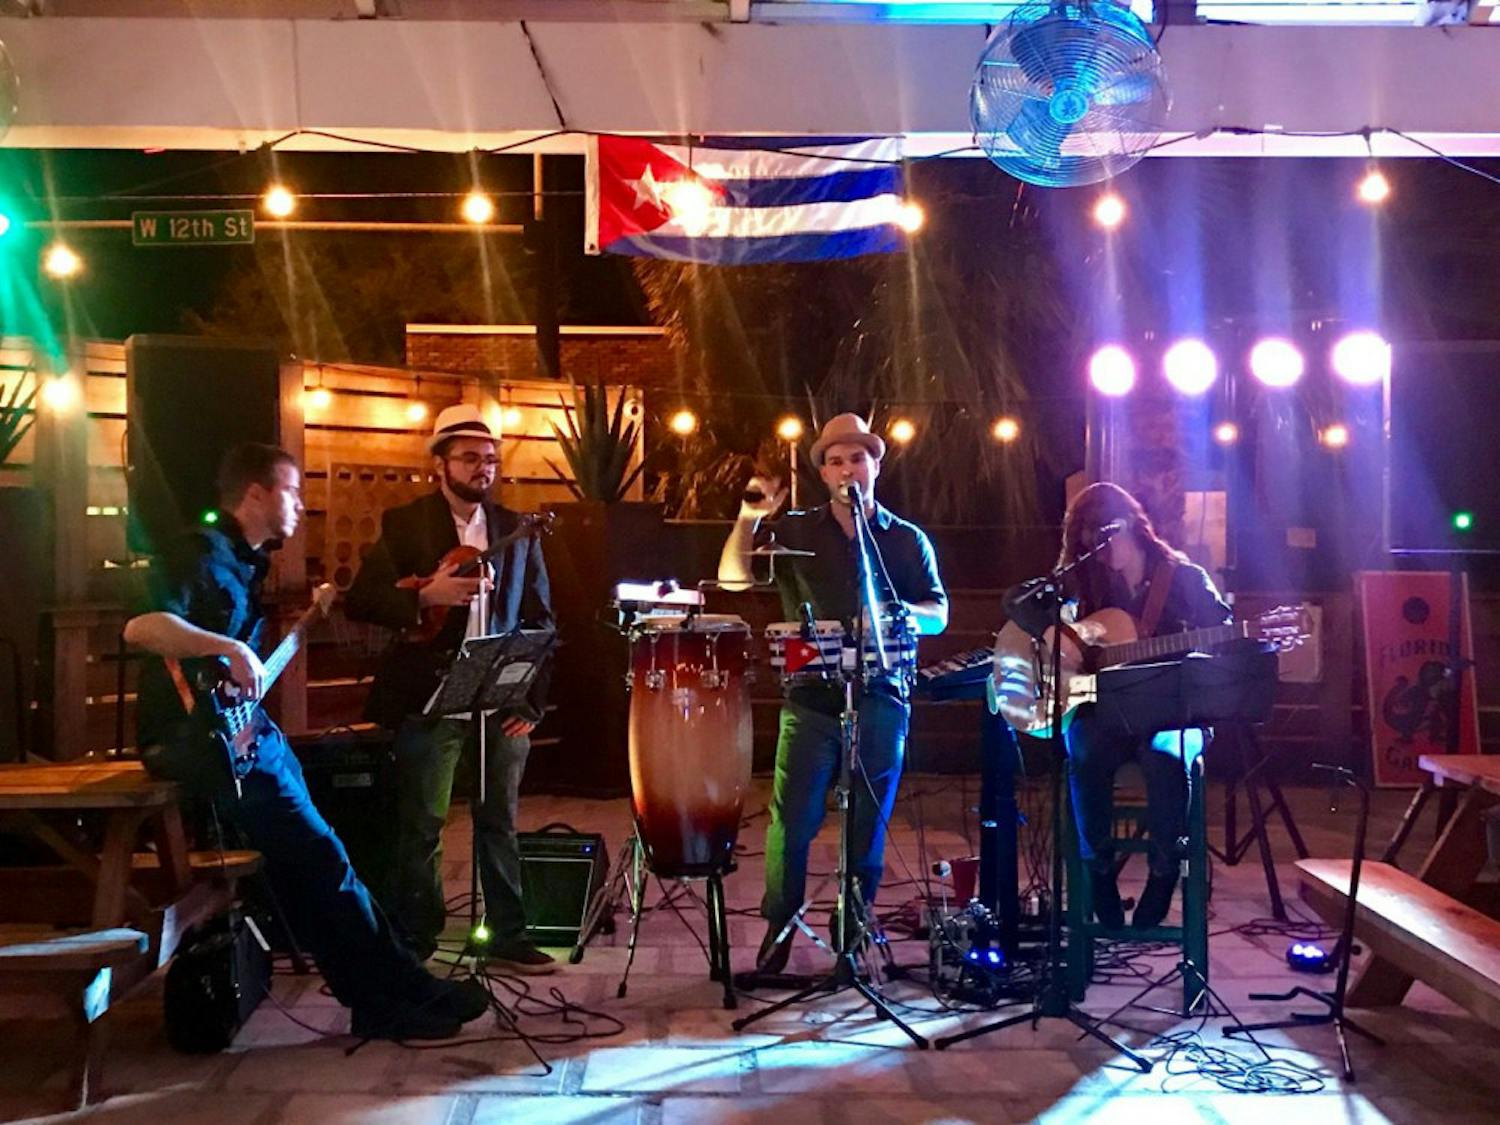 Latino’s Sound Machine, a local latin music band, plays at Felipe’s Taqueria, located at 1209 W. University Ave., during a fundraising event for Cuban hurricane victims. The event raised $540 for construction supplies.